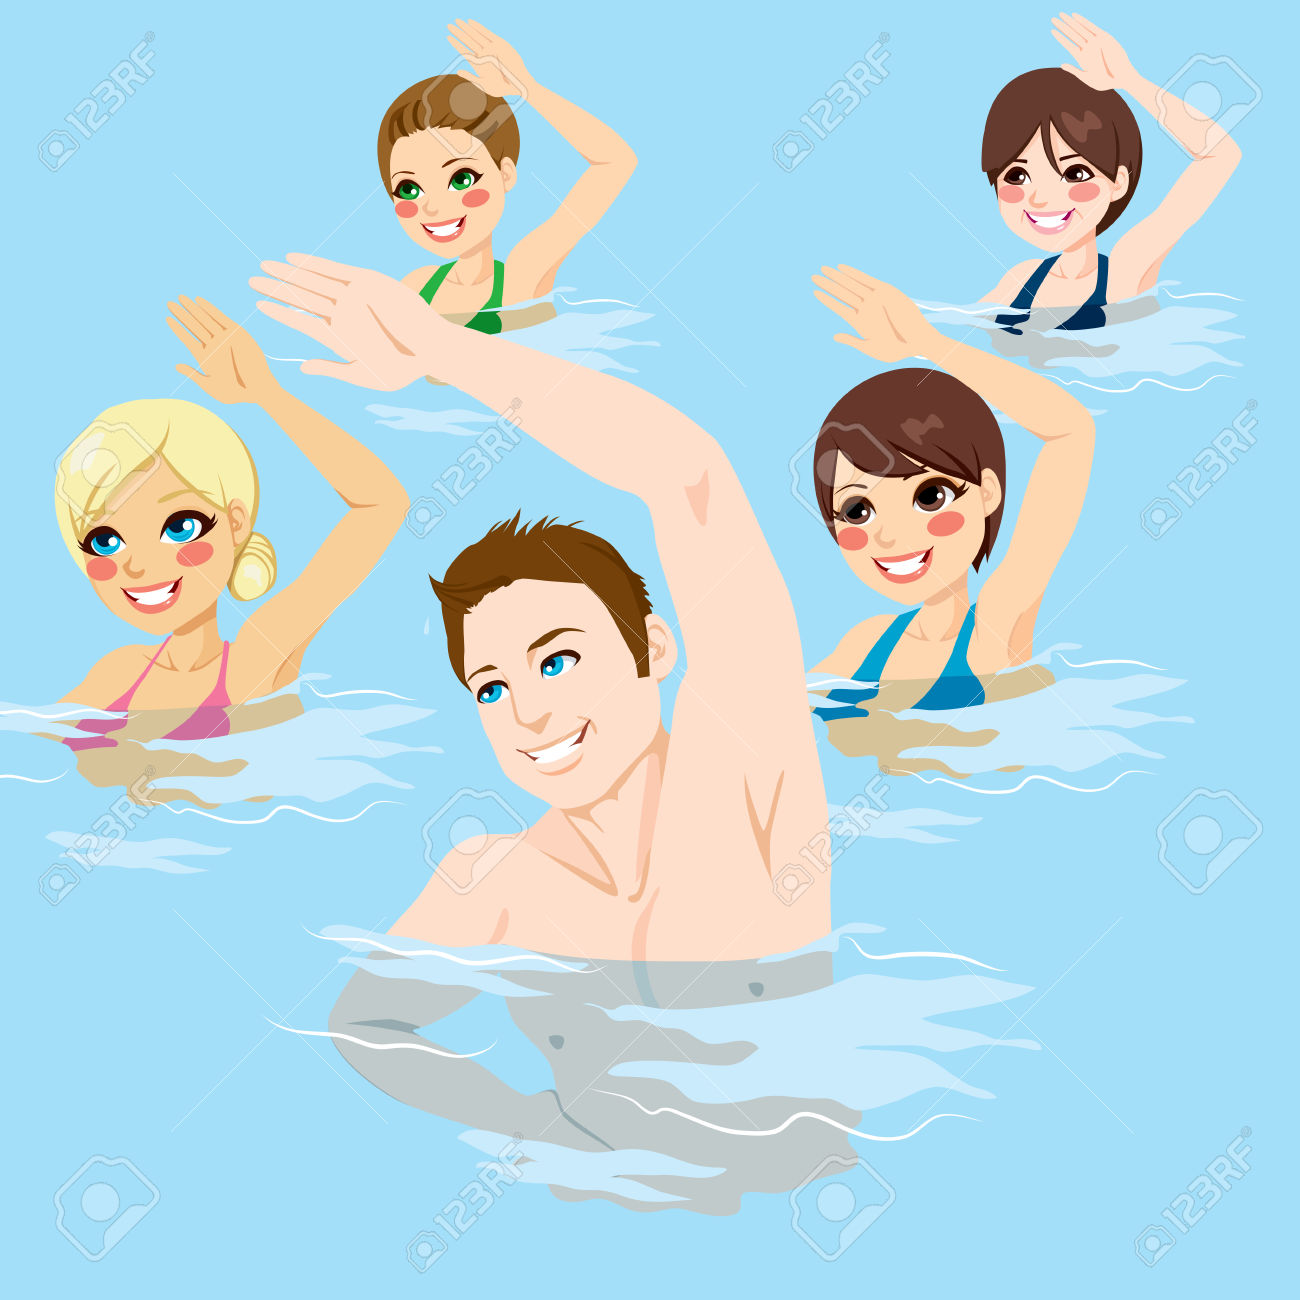 Swimming with friends clipart